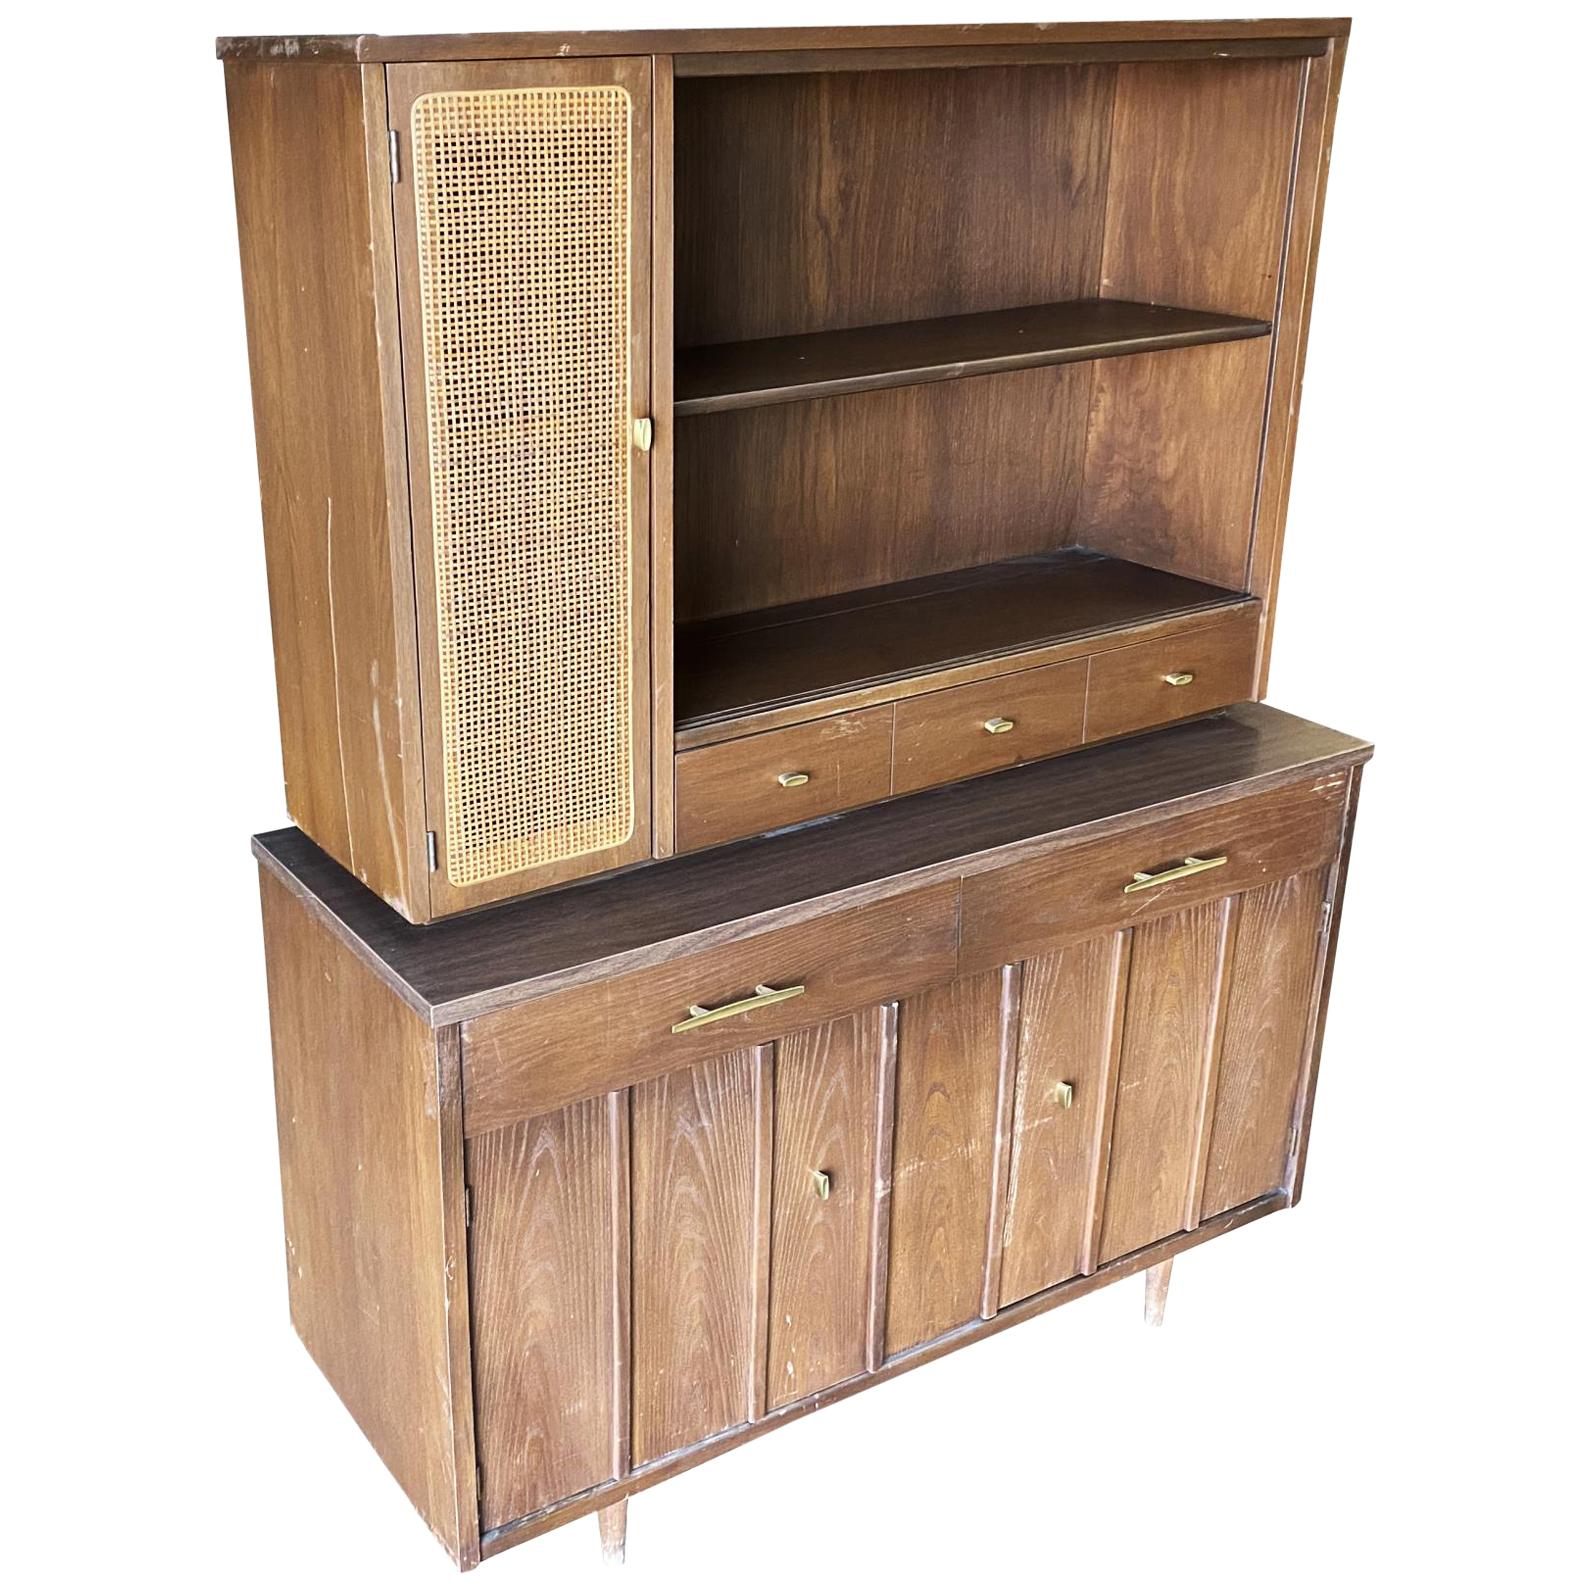 Midcentury Cupboard China Cabinet Shelf with Wicker Accents by Holman For Sale